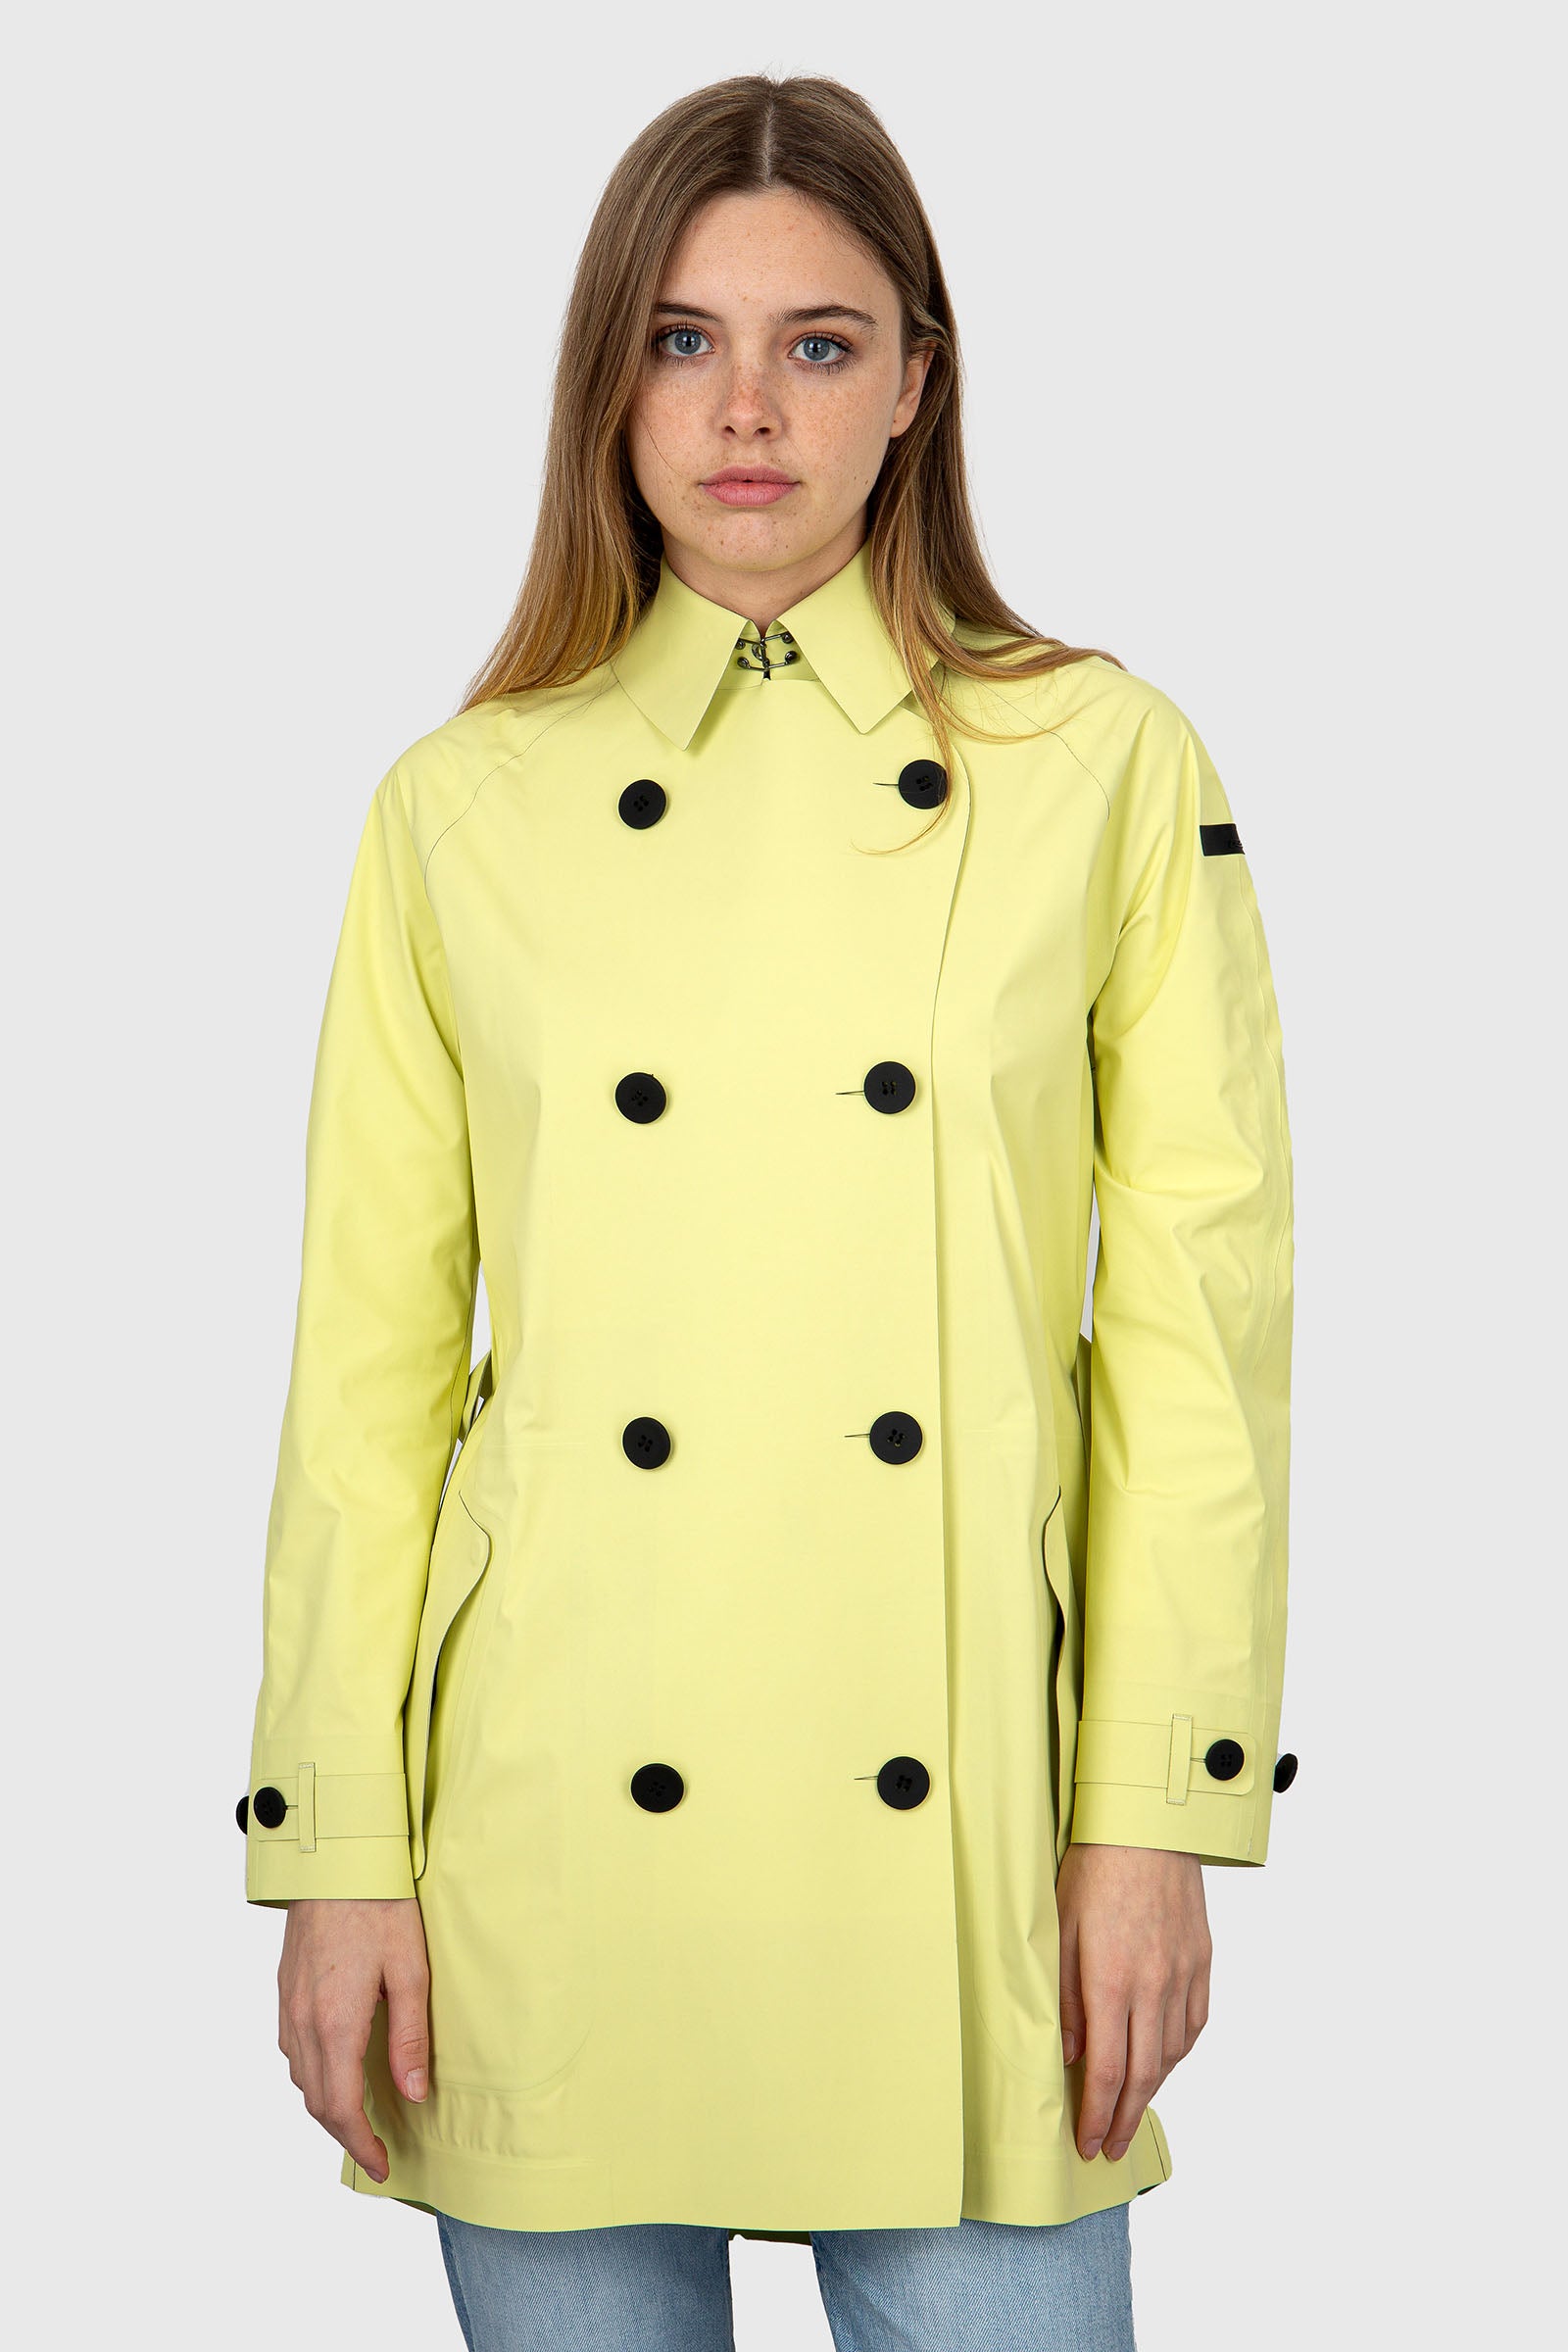 RRD Tech Pack Synthetic Yellow Trench - 10